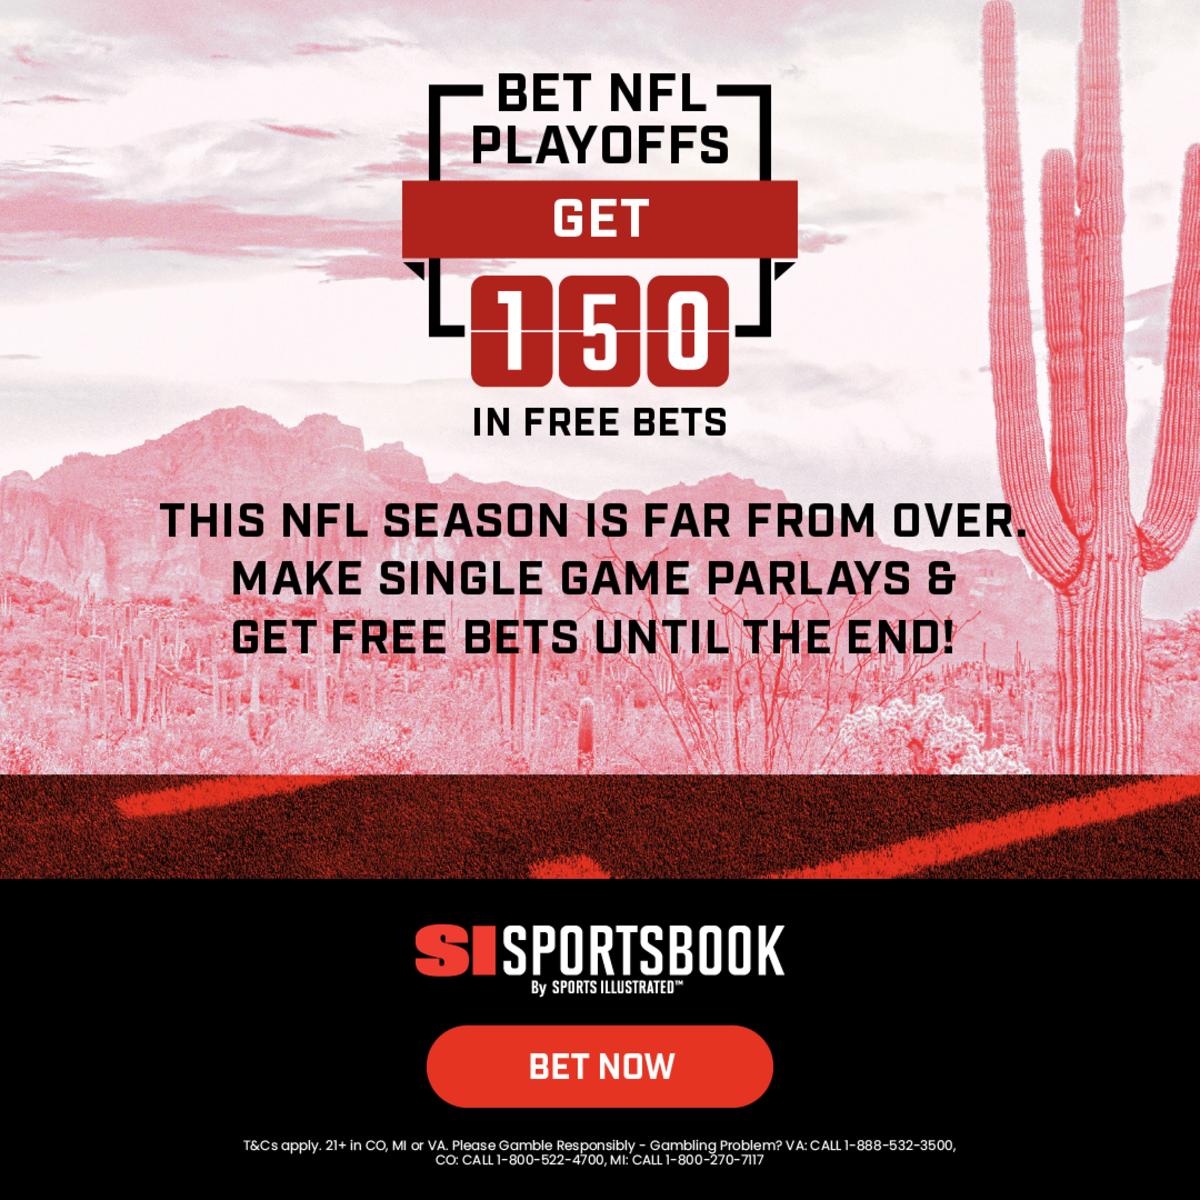 Get $150 in free bets on SI Sportsbook